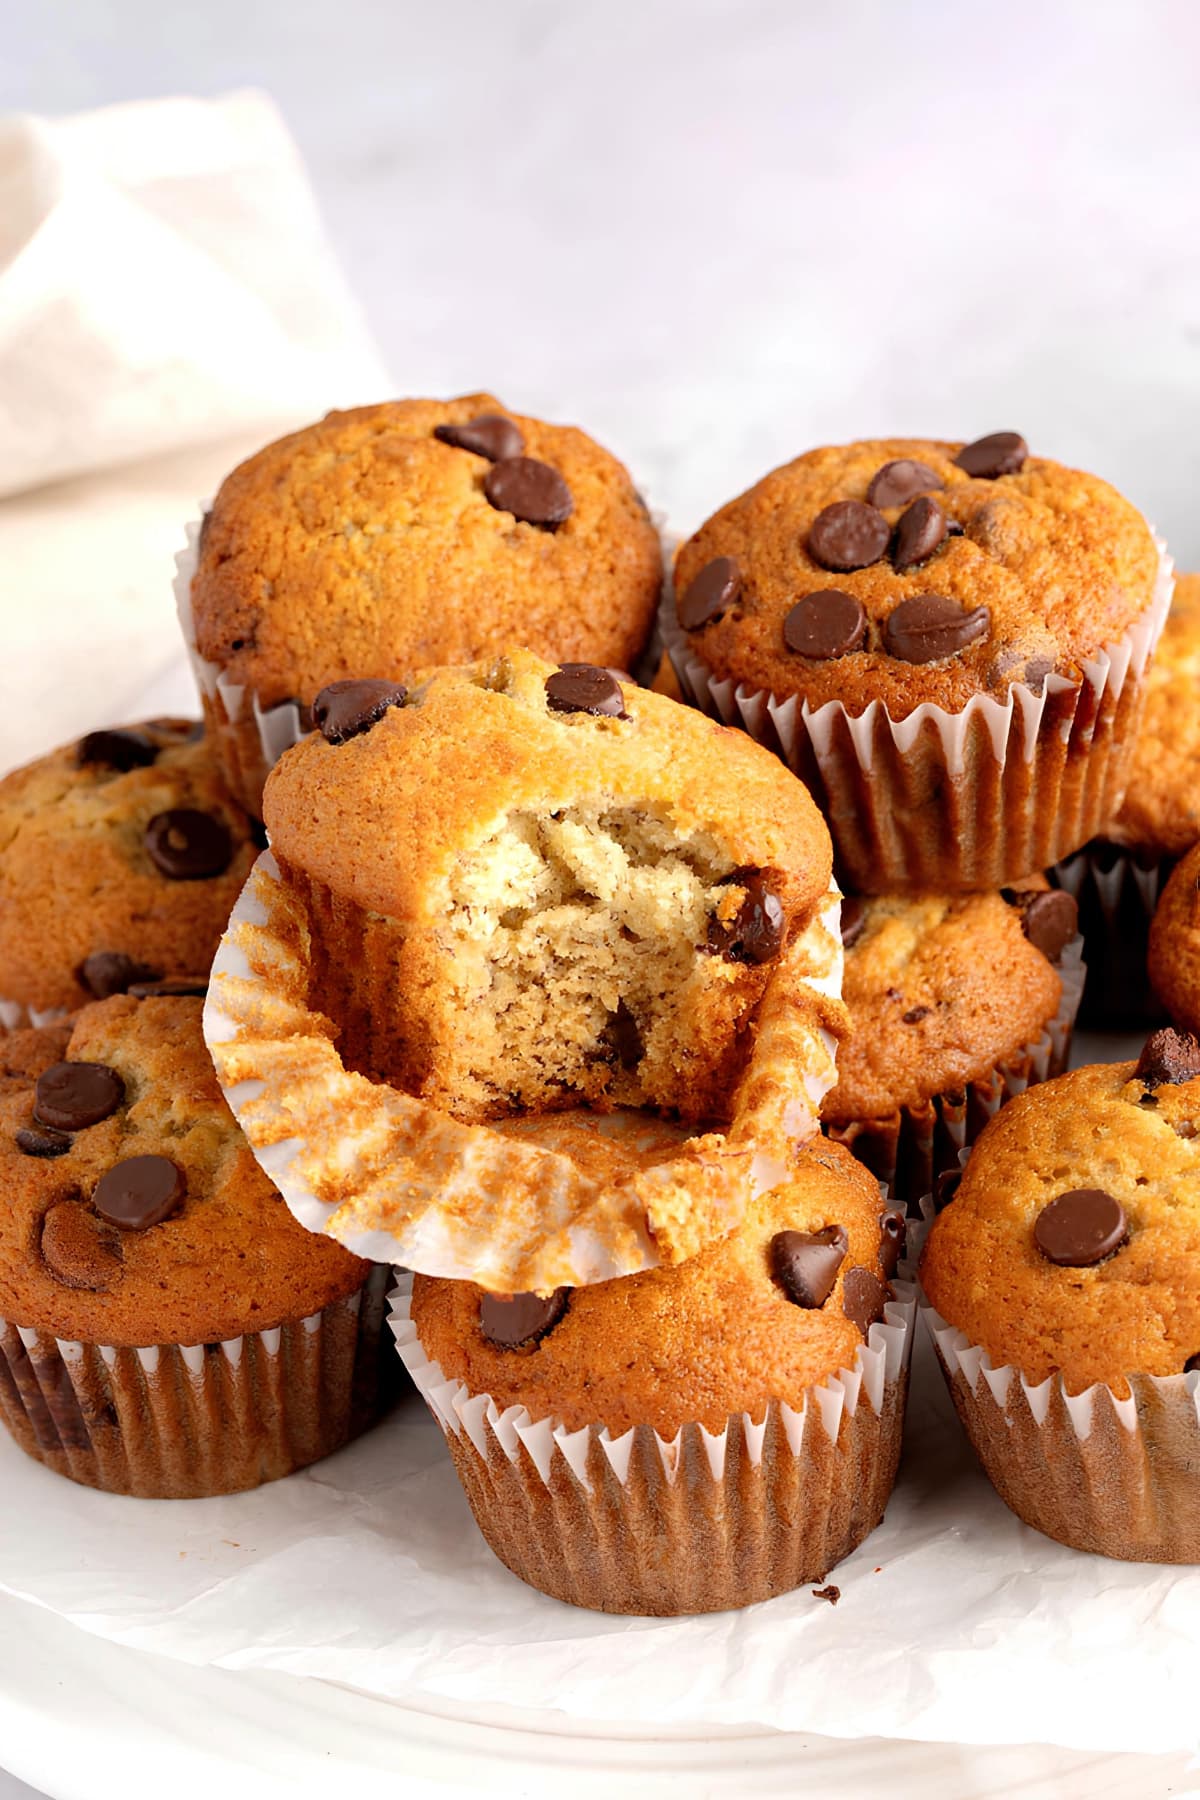 Sweet and Fluffy Banana Chocolate Chip Muffins